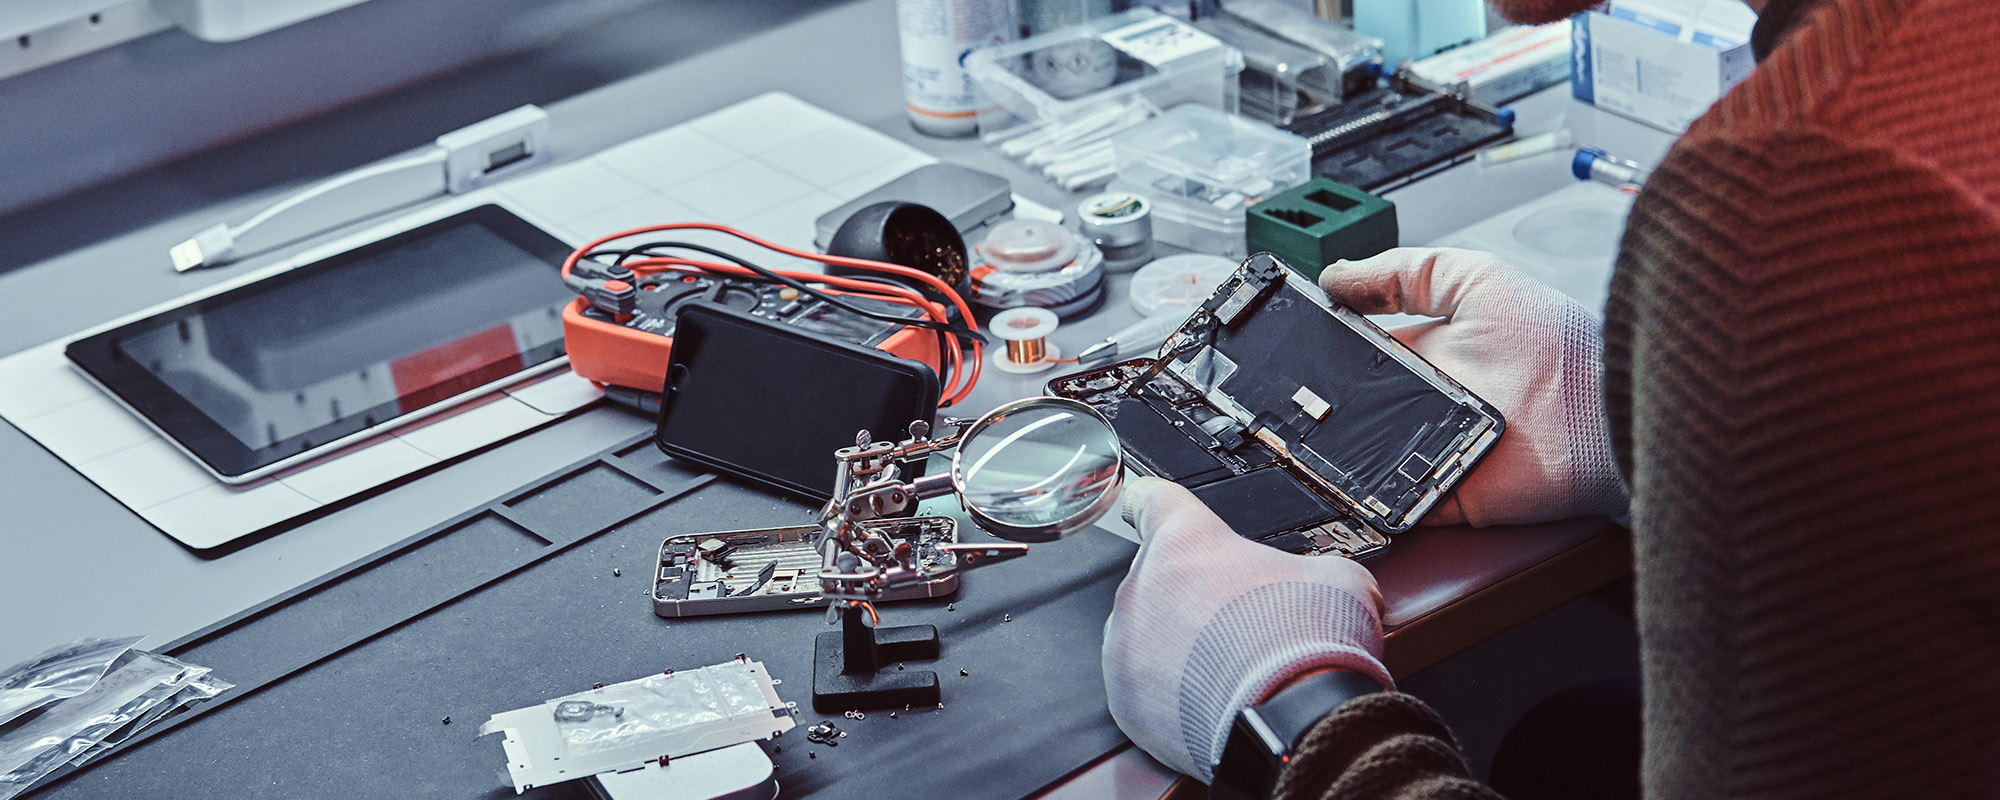 technician carefully examines the integrity of the internal elements of the smartphone in a modern repair shop